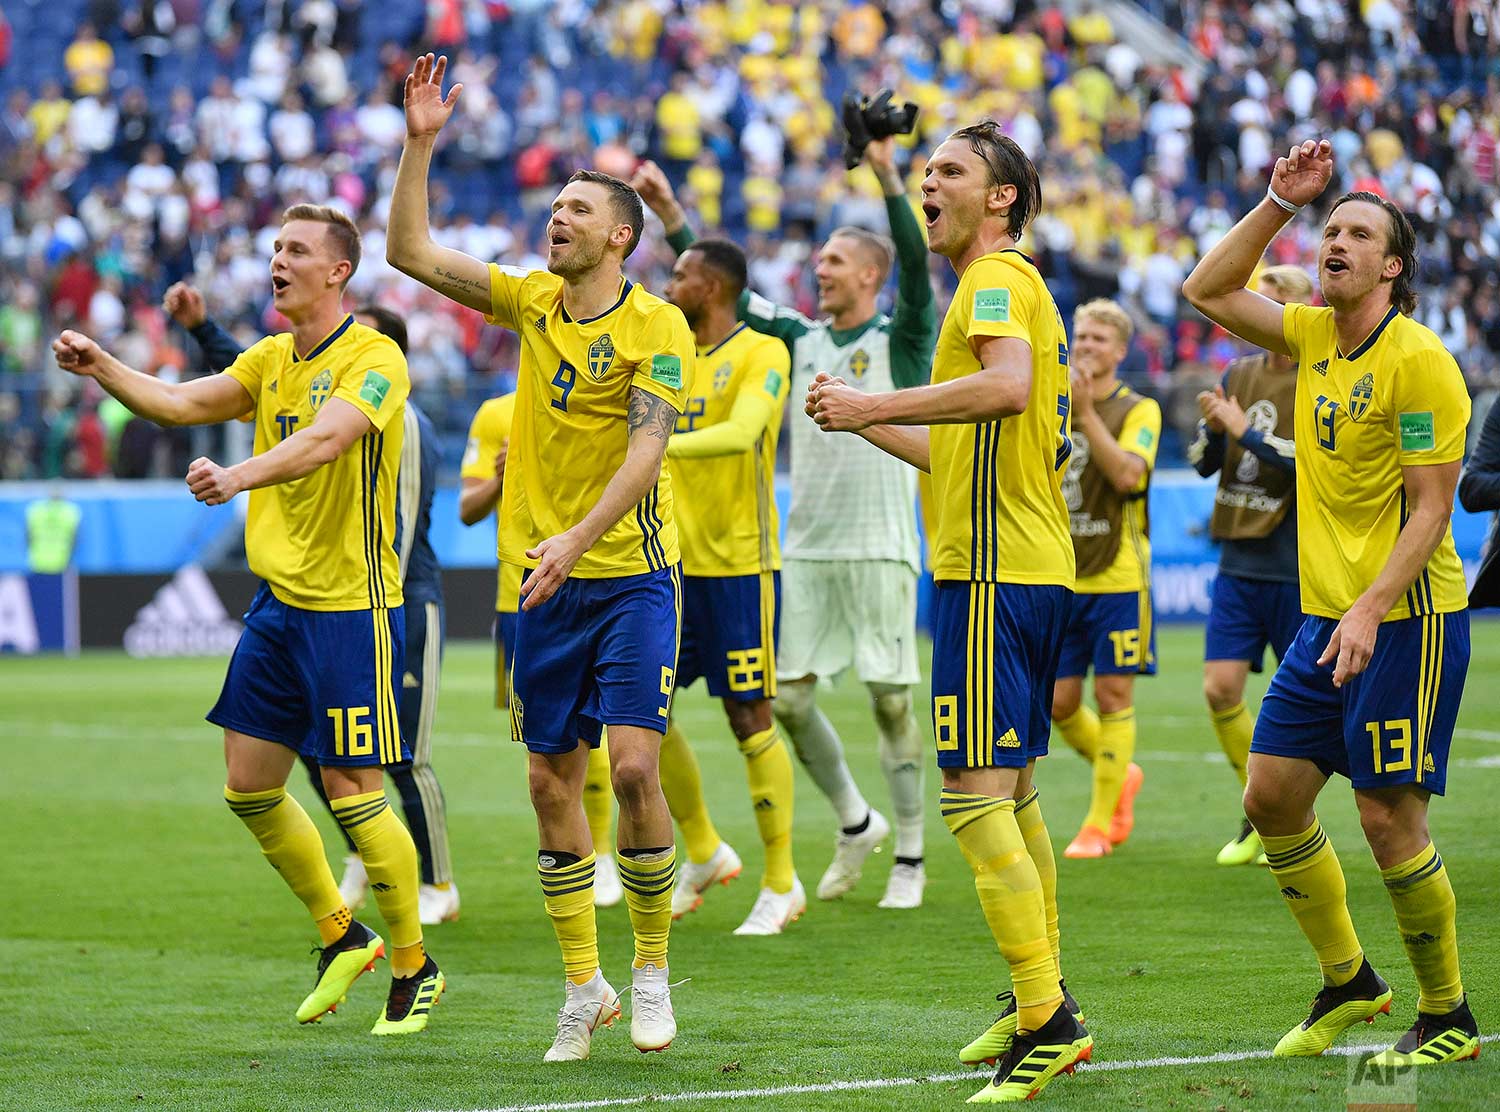  Sweden teammates celebrate after winning the round of 16 match between Switzerland and Sweden at the 2018 soccer World Cup in the St. Petersburg Stadium, in St. Petersburg, Russia, Tuesday, July 3, 2018. (AP Photo/Martin Meissner) 